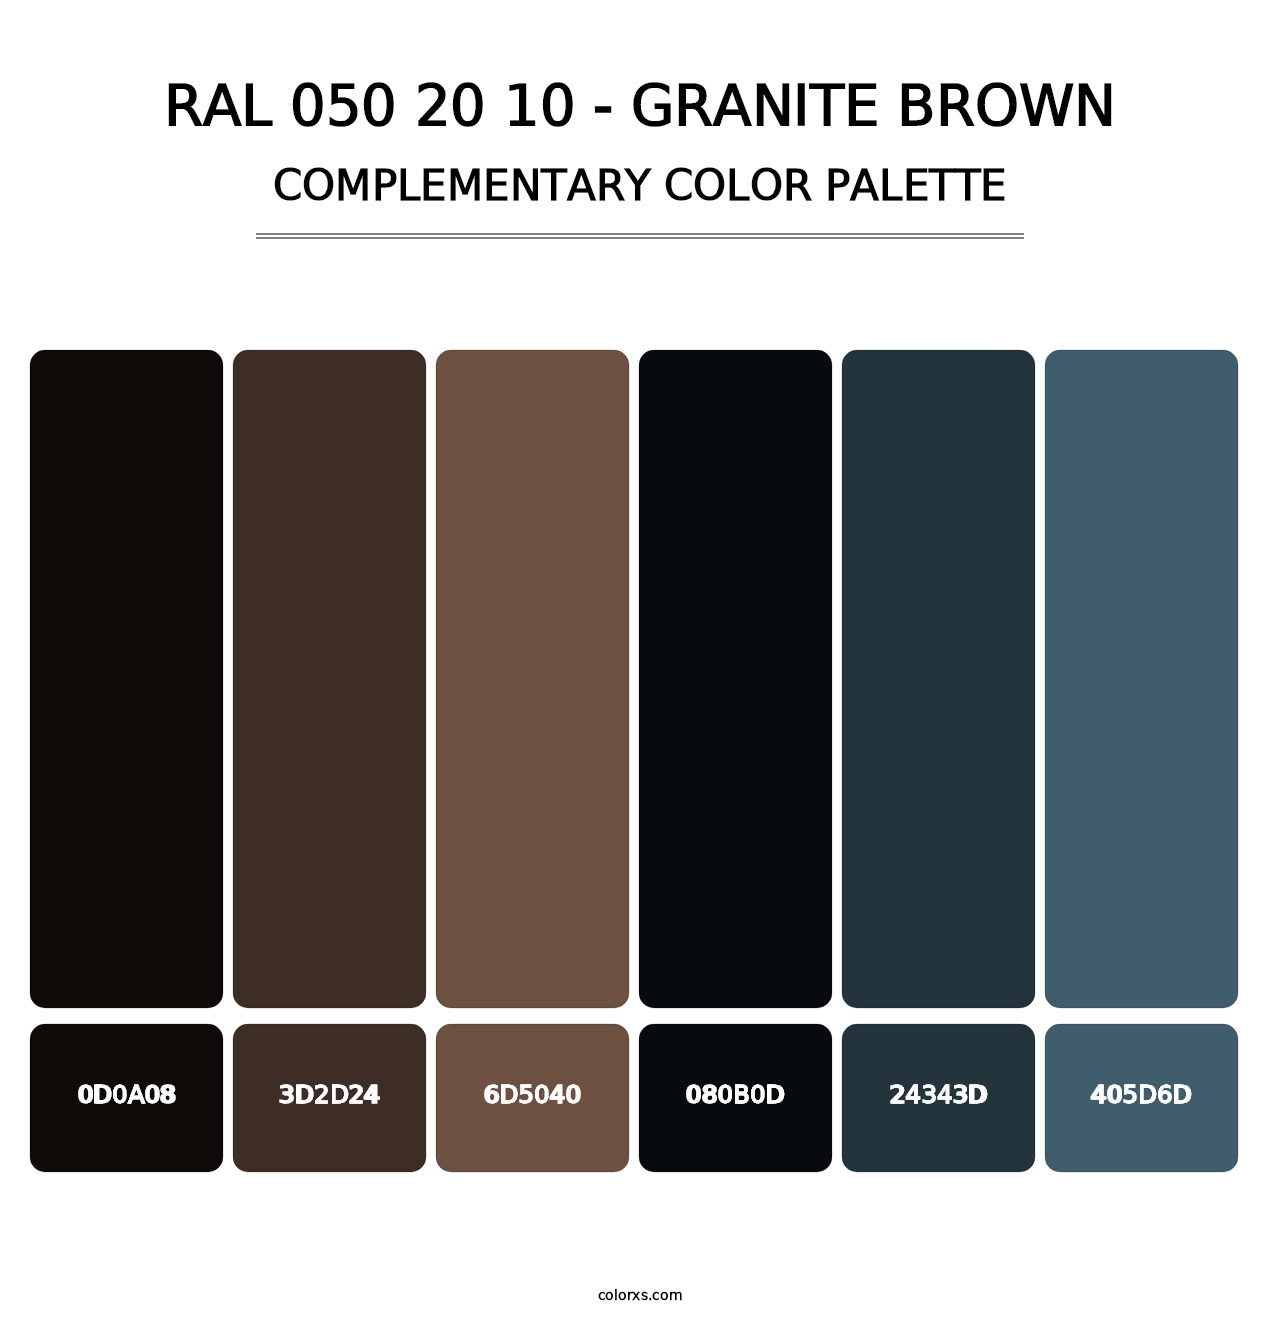 RAL 050 20 10 - Granite Brown - Complementary Color Palette